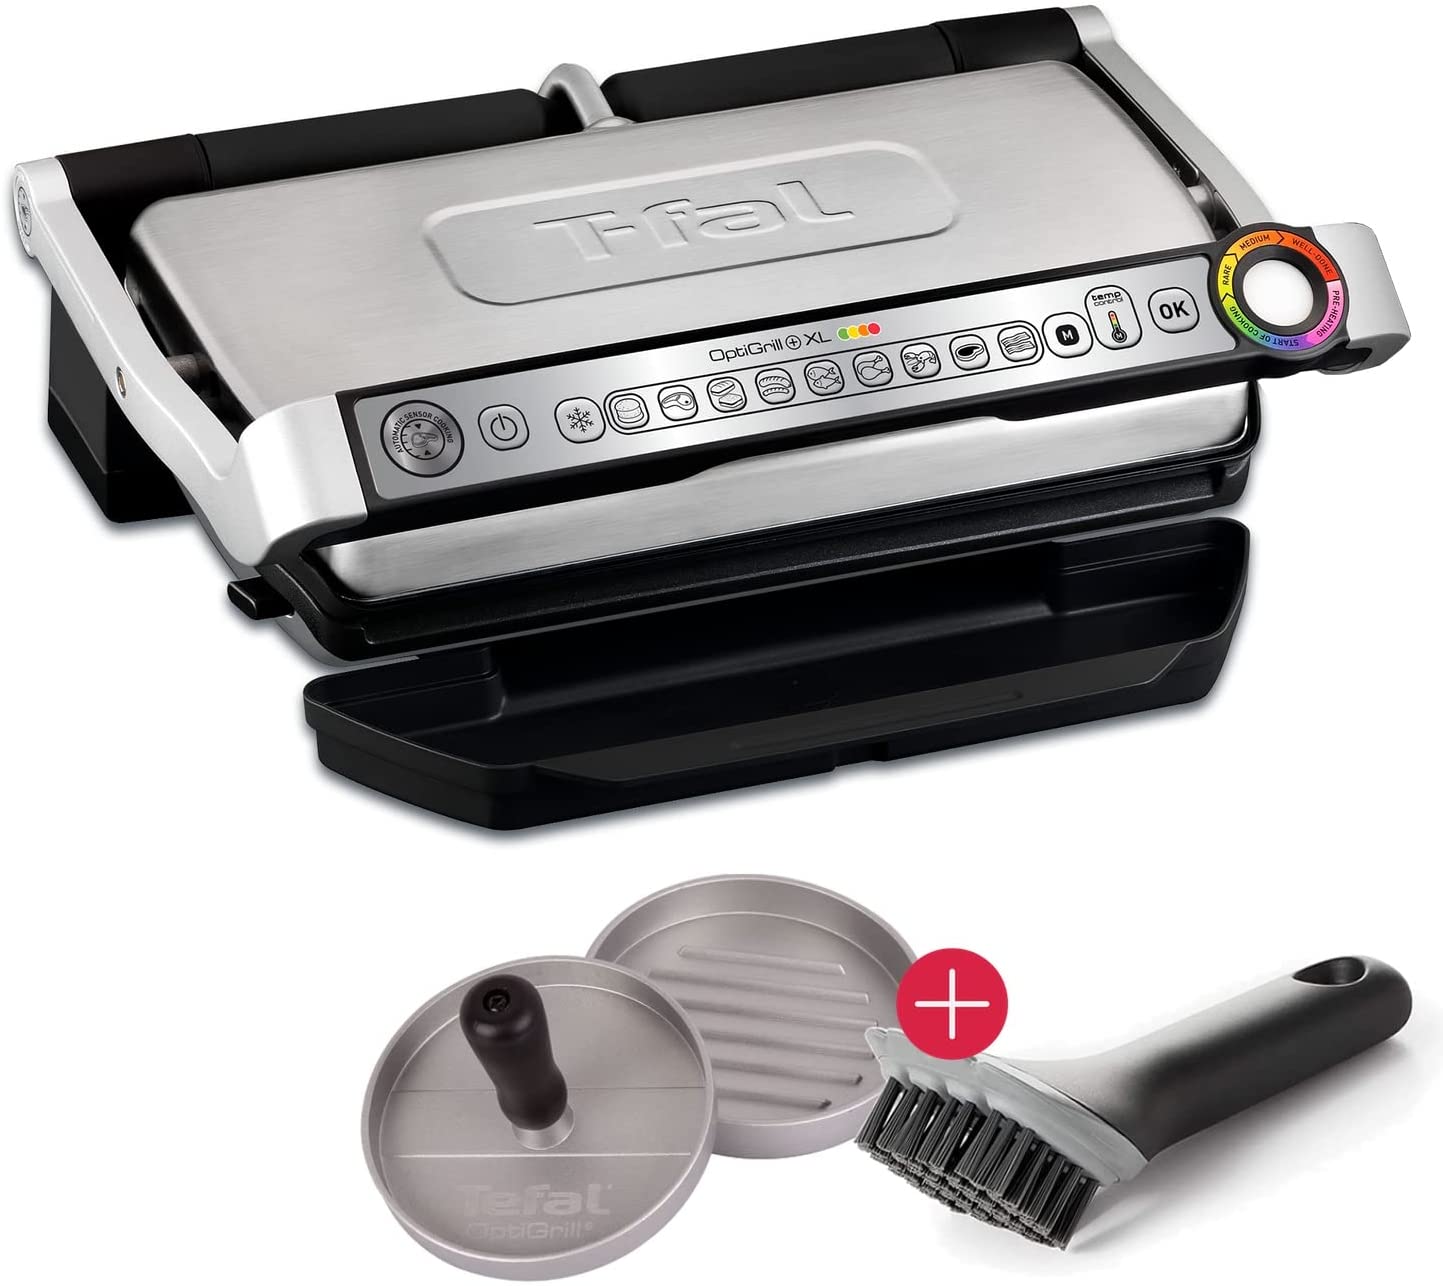 Tefal OptiGrill+ XL Electric Contact Grill + Cleaning Grill Brush + Hamburger Press, 9 Automatic Programmes, Indoor Electric Grill, Ideal Grill Results, Non-Stick Cast Aluminium Plates, Stainless Steel